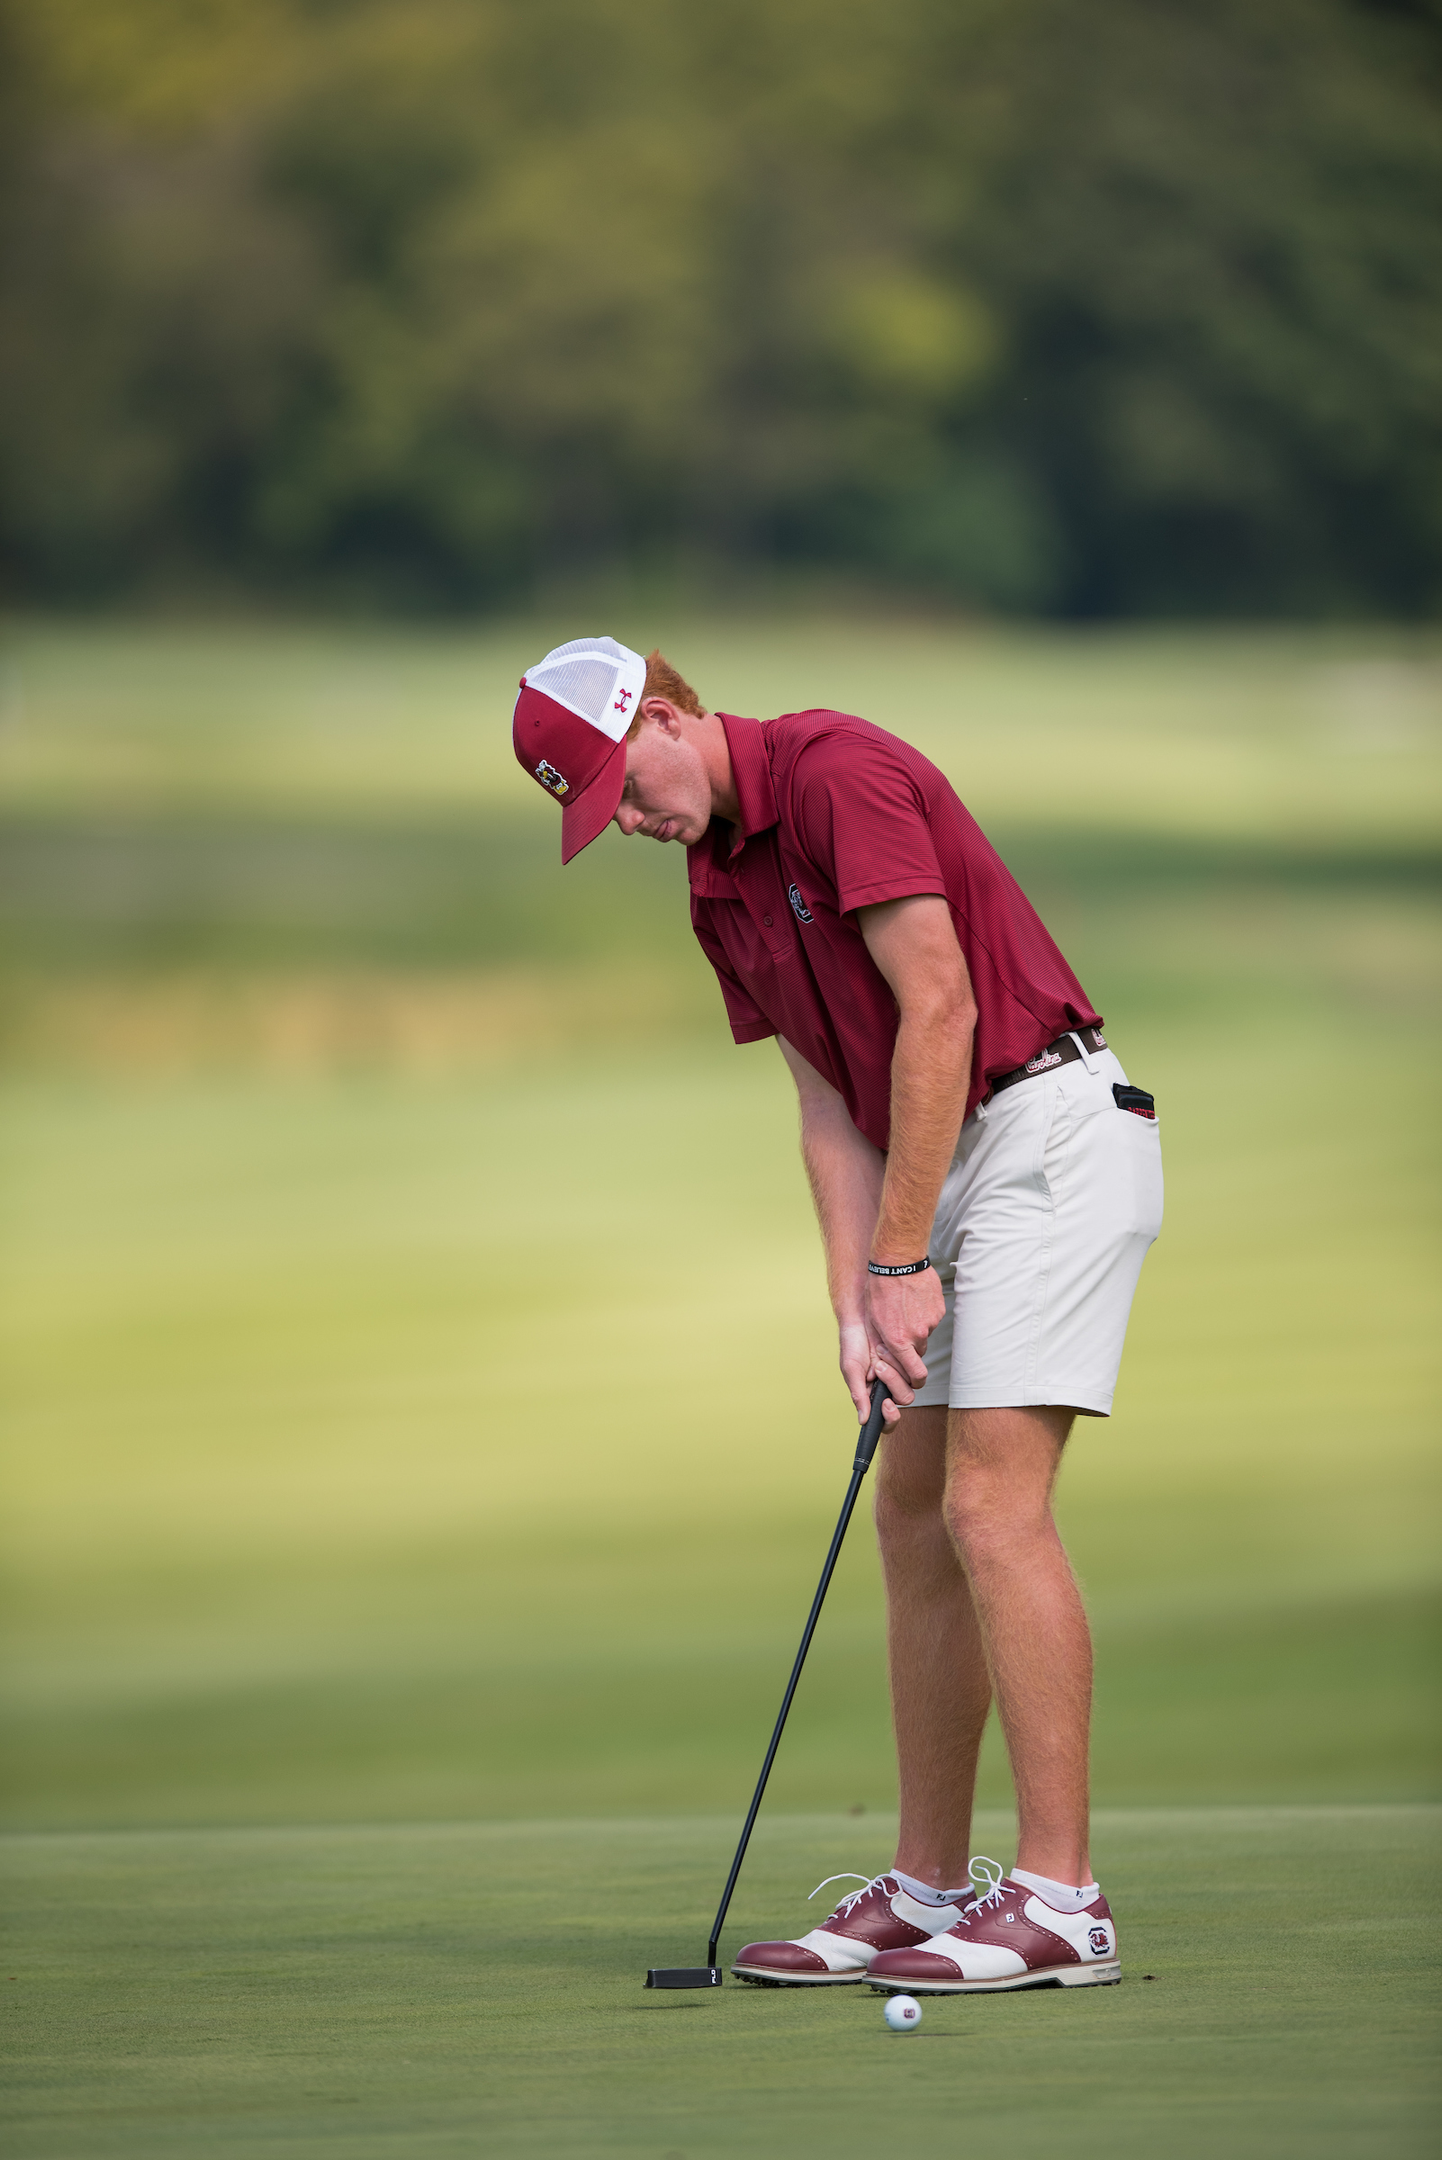 Gamecocks Back on the Course Friday in Georgia